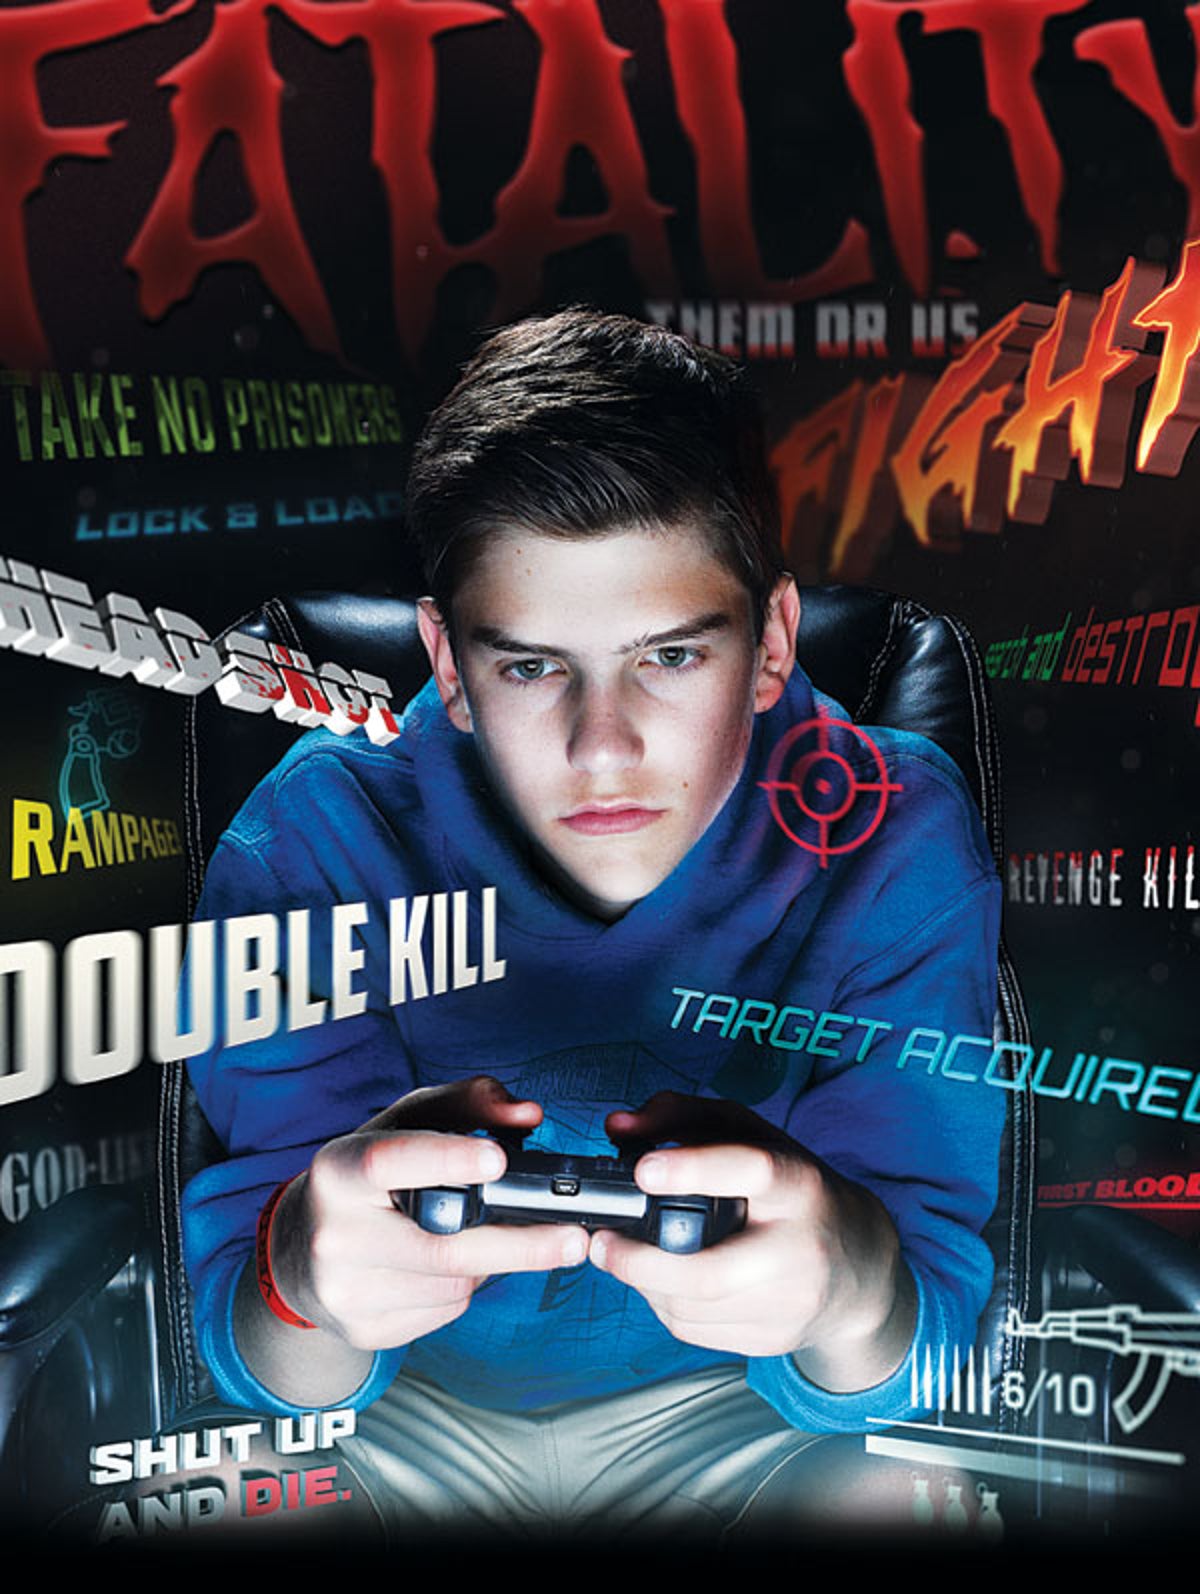 Do Video Games Make Kids Saints or Psychopaths (and Why Is It So